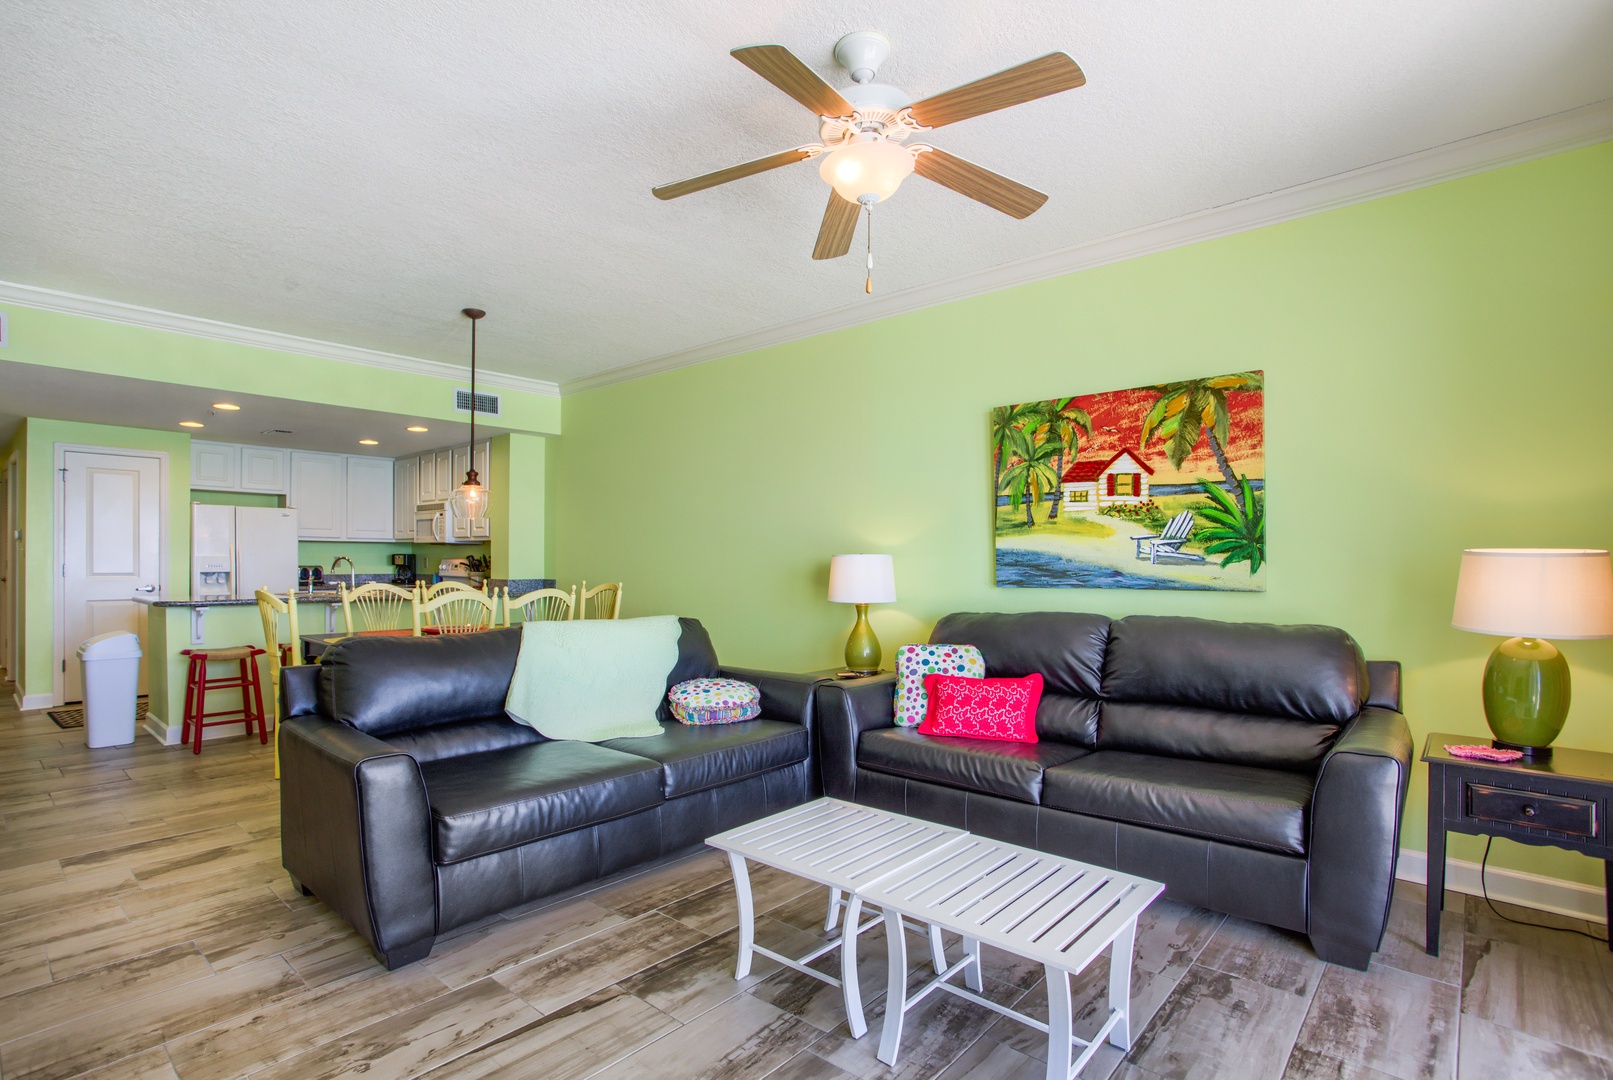 Ample comfortable seating is available in the Living Room